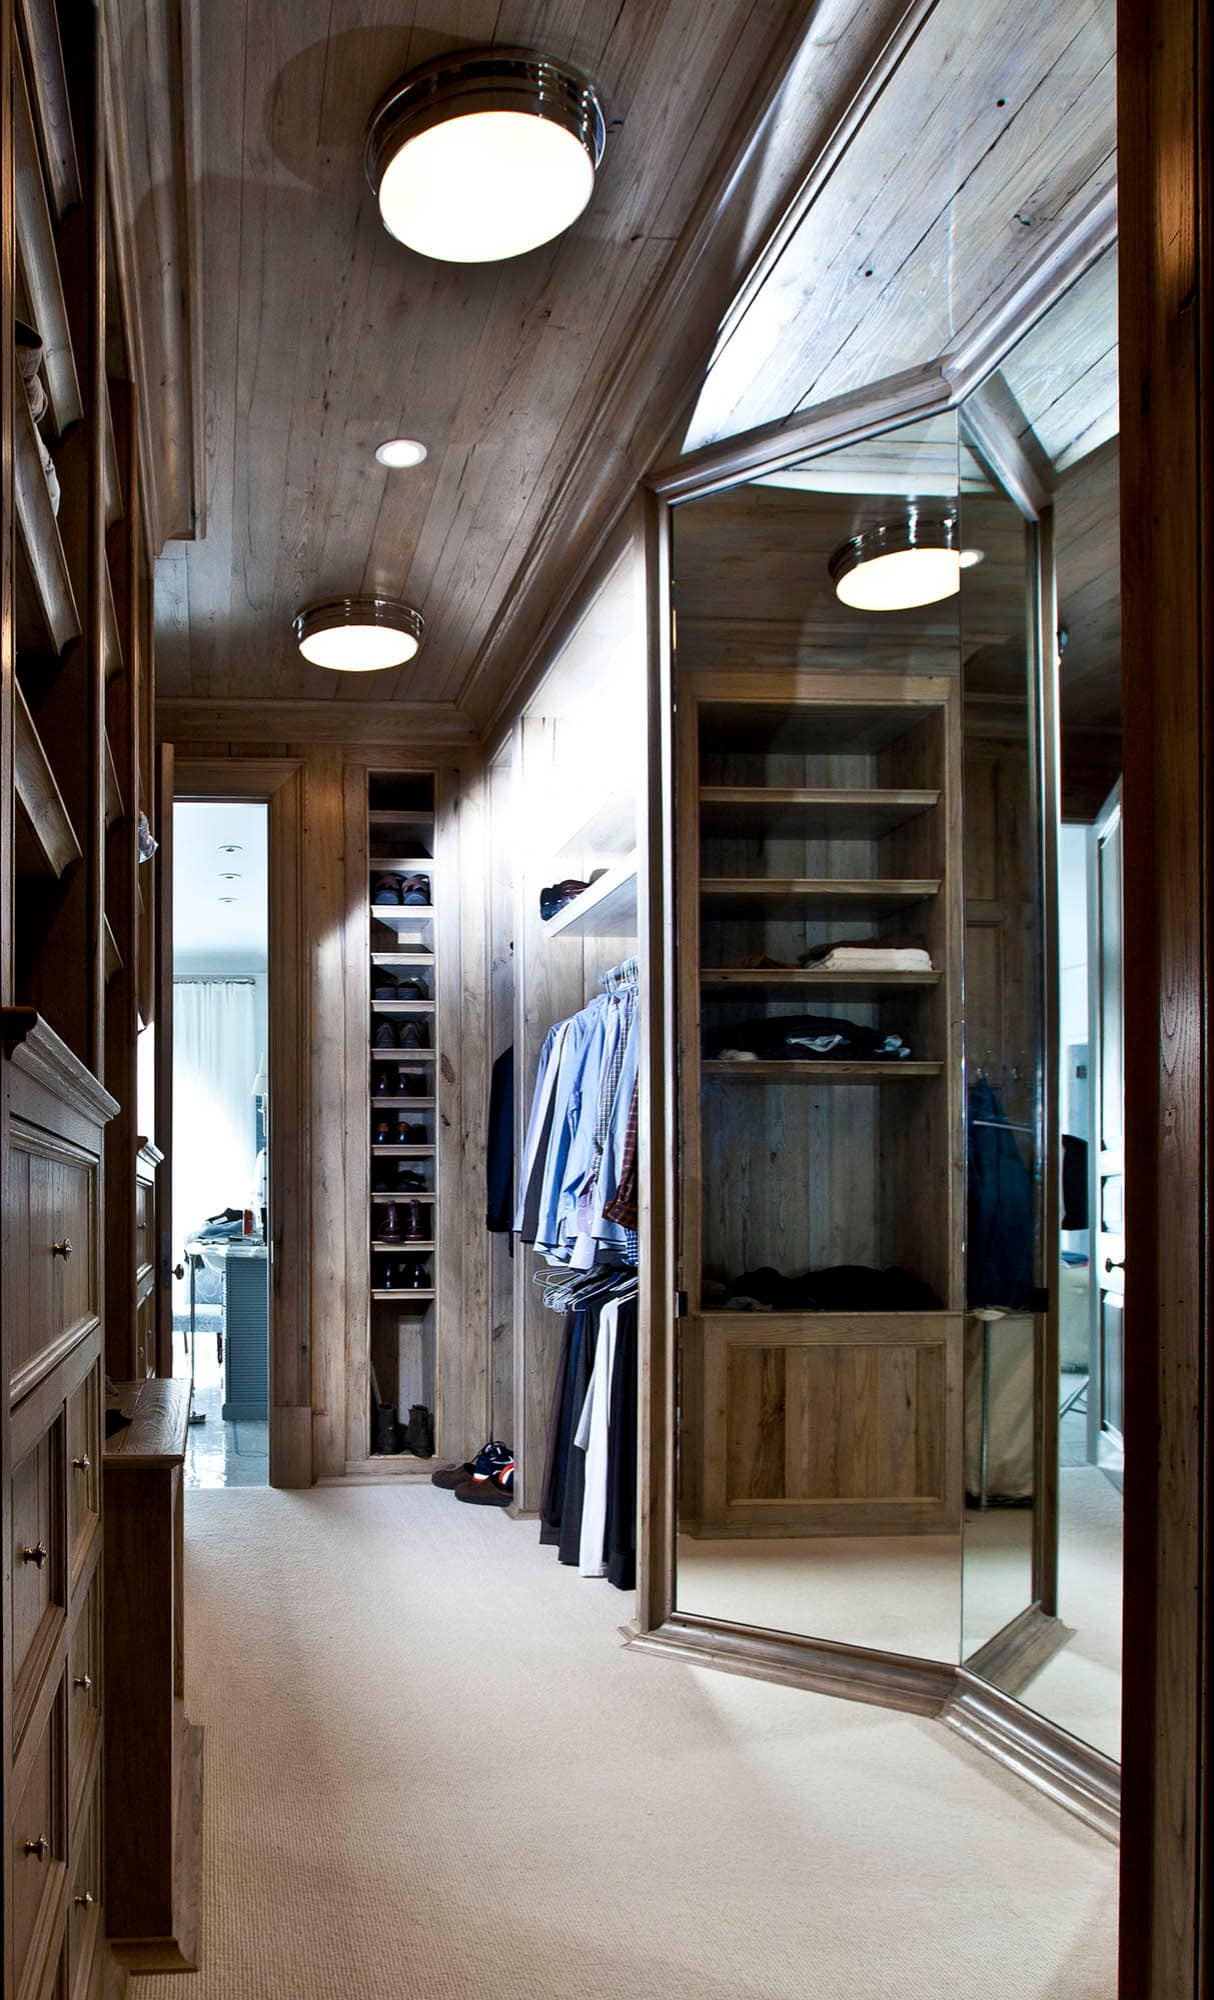 High-end walk-in closet featured in home tour